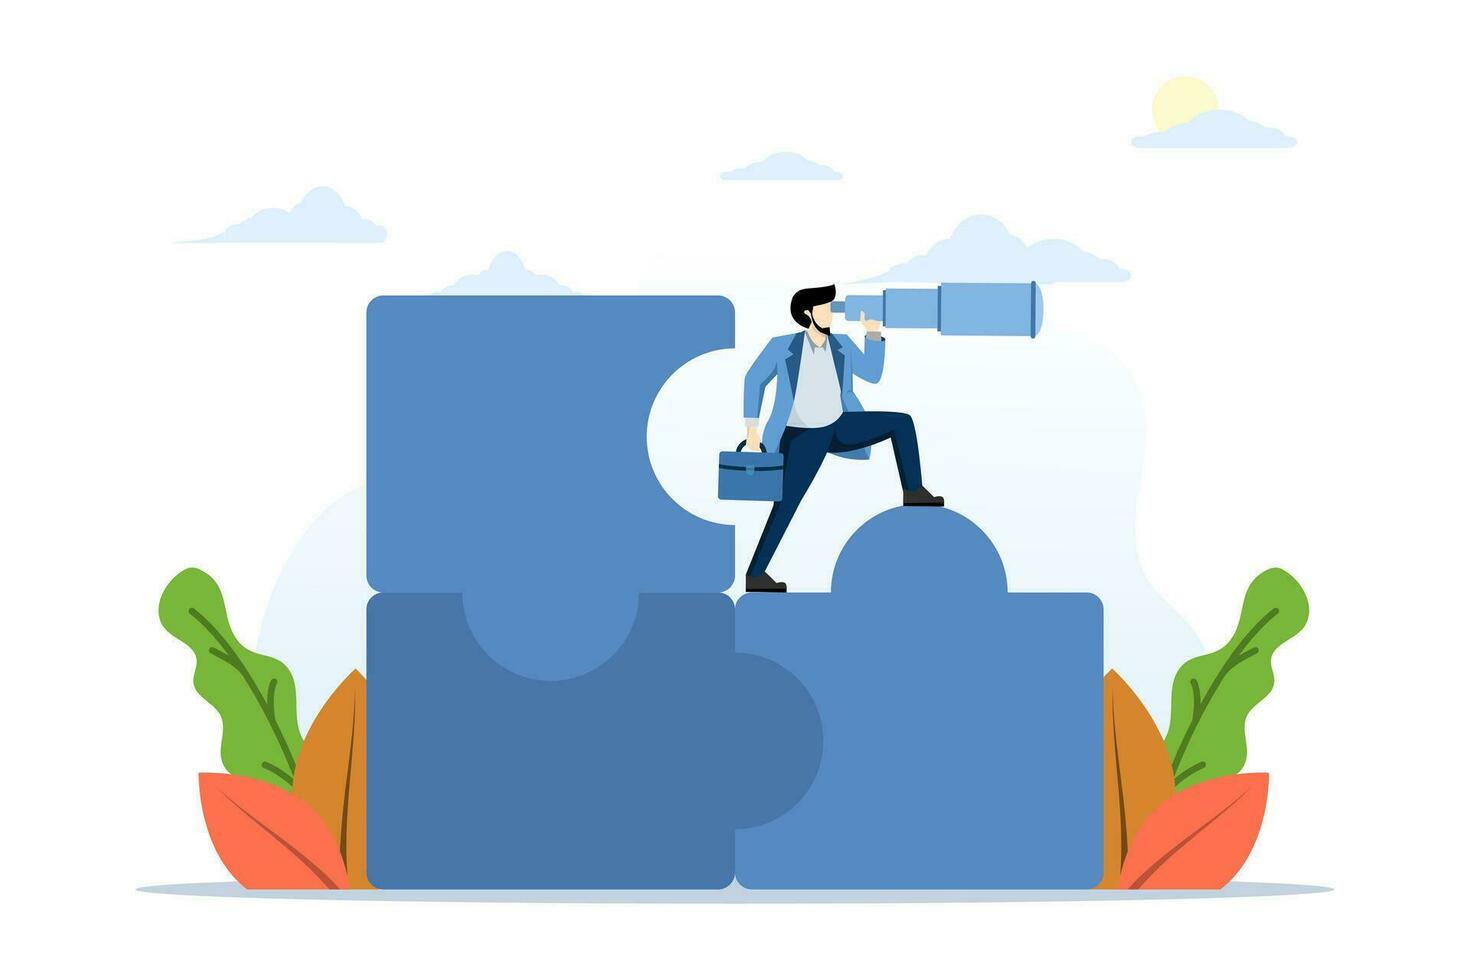 concept of finding a solution or looking for the last missing piece to complete or complete a job, leadership mission, businessman standing on an incomplete puzzle looking for the missing piece. vector